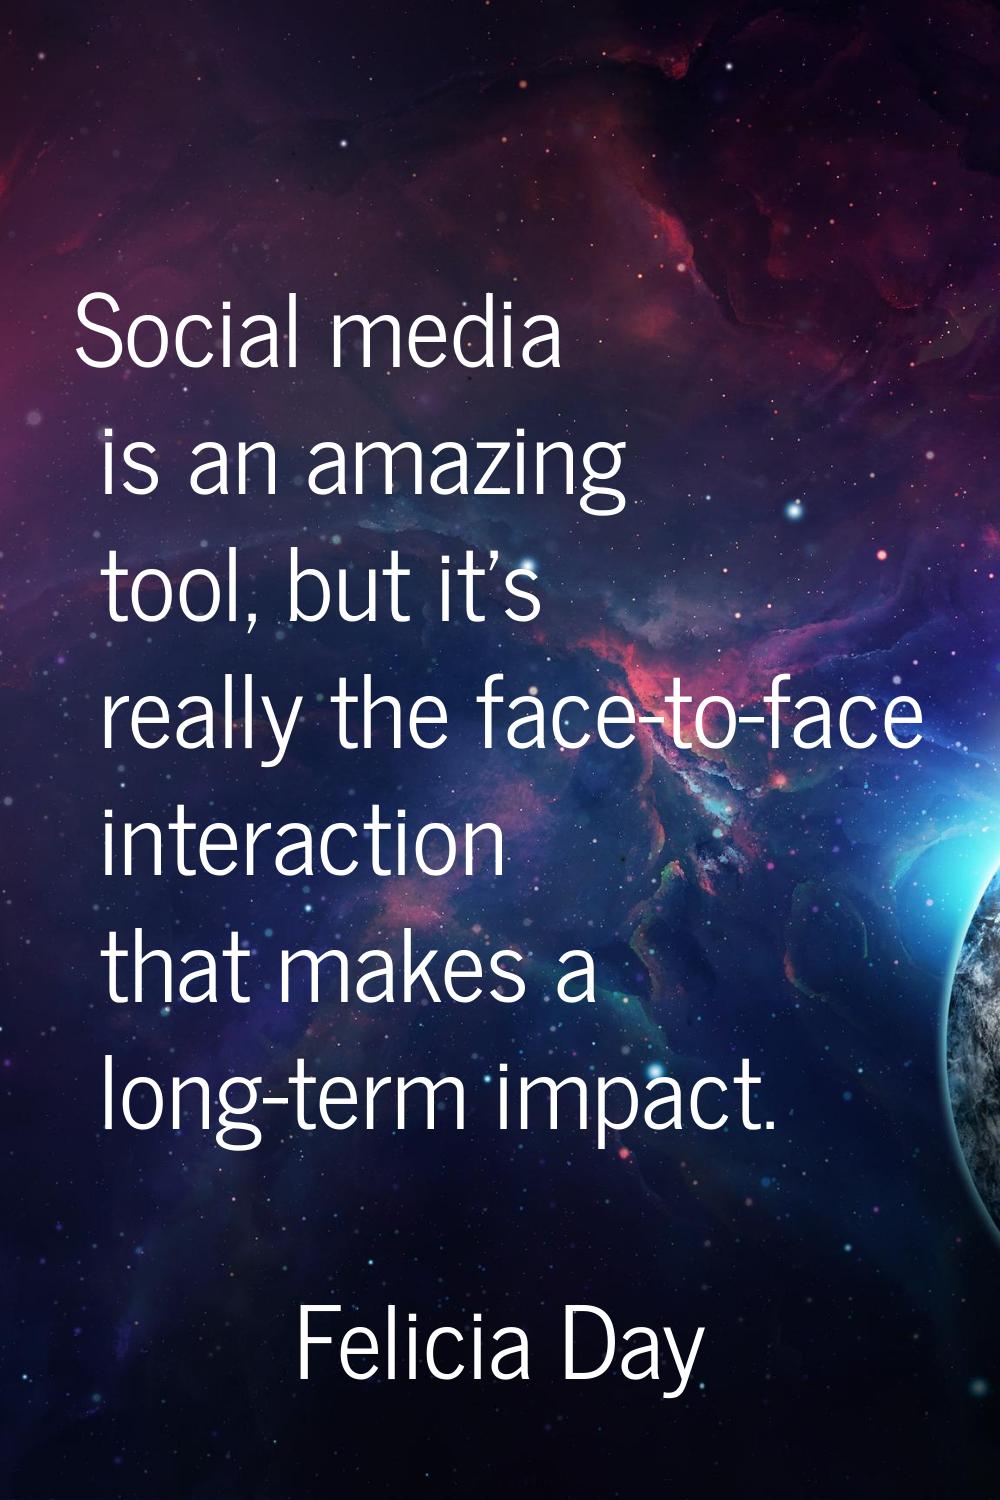 Social media is an amazing tool, but it's really the face-to-face interaction that makes a long-ter